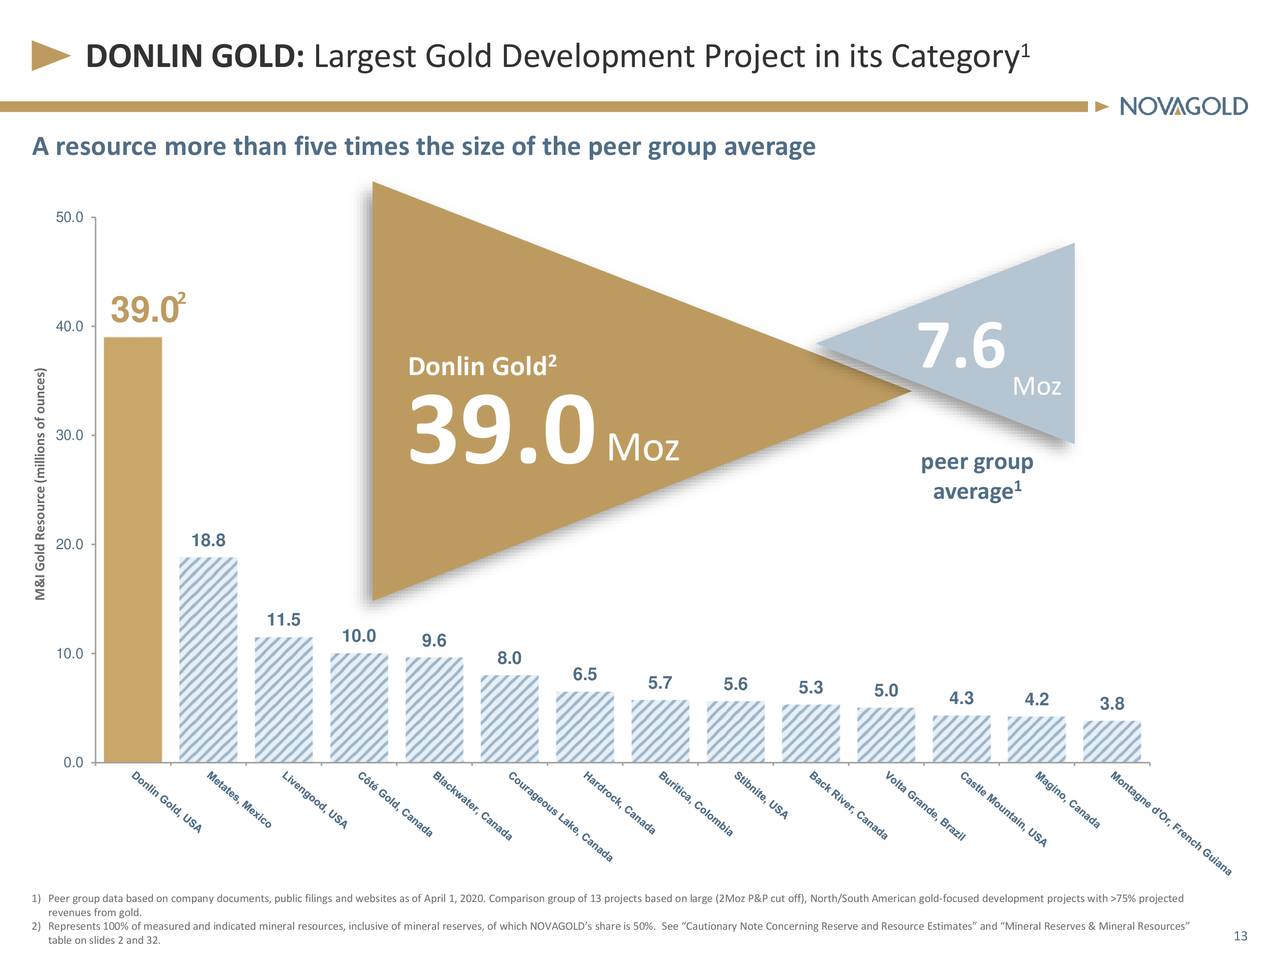 DONLIN GOLD: Largest Gold Development Project in its Category                              1